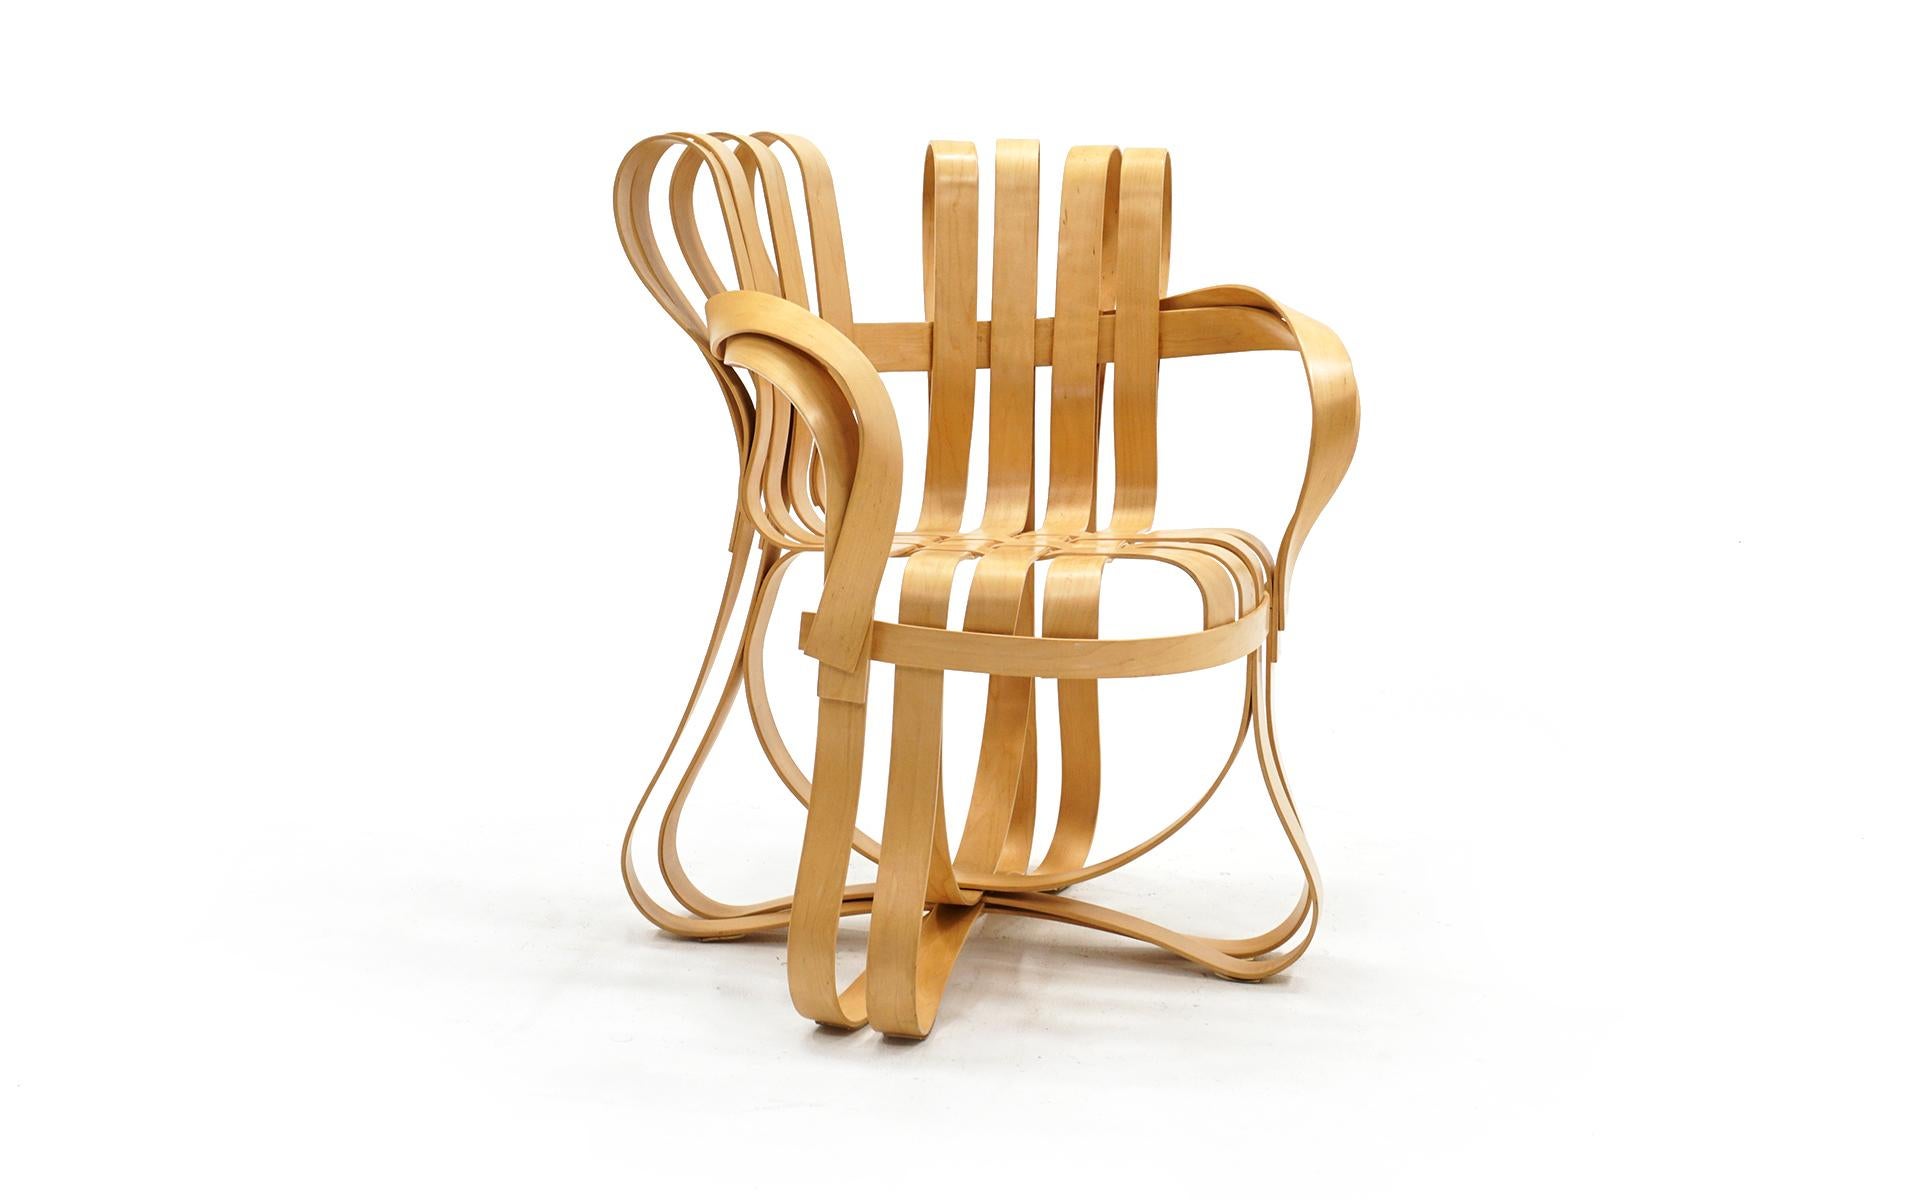 Cross check chair designed by Frank Gehry for Knoll, 1992. Stamped with the KnollStudio logo, Frank Gehry's signature. Condition is virtually like new.
Inspired by the apple crates he had played on as a child, Pritzker Prize-winning architect Frank